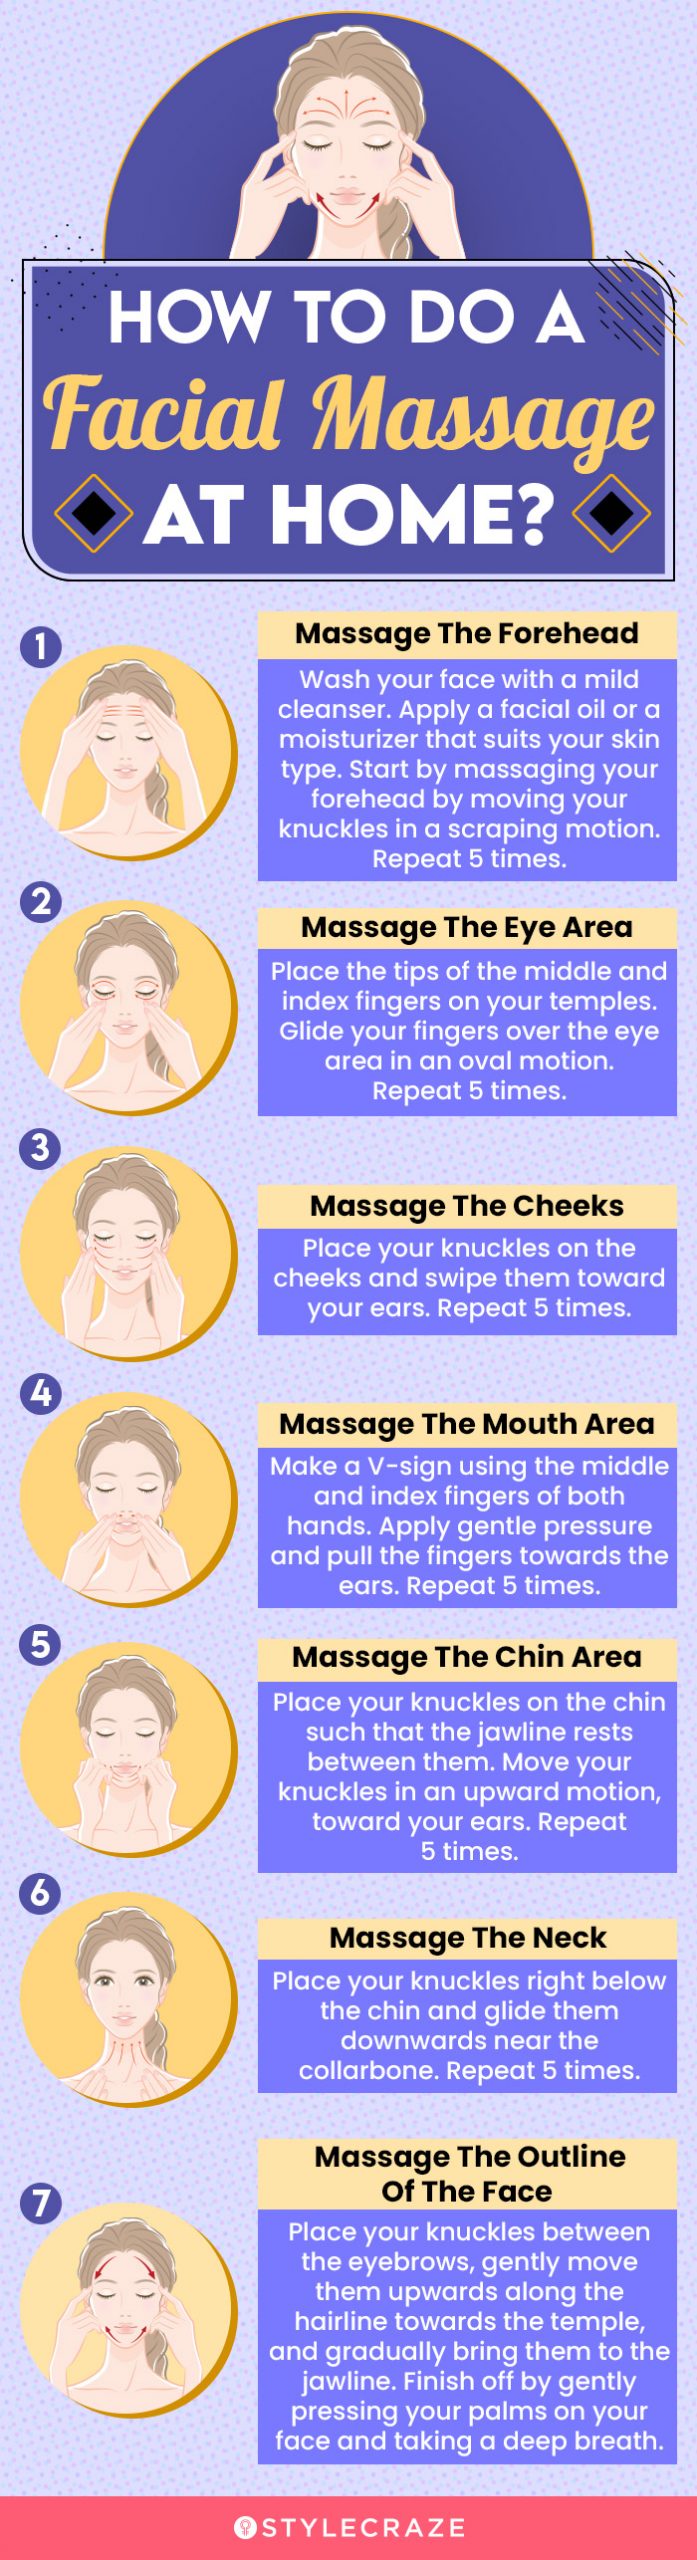 how to do a facial massage at home (infographic)